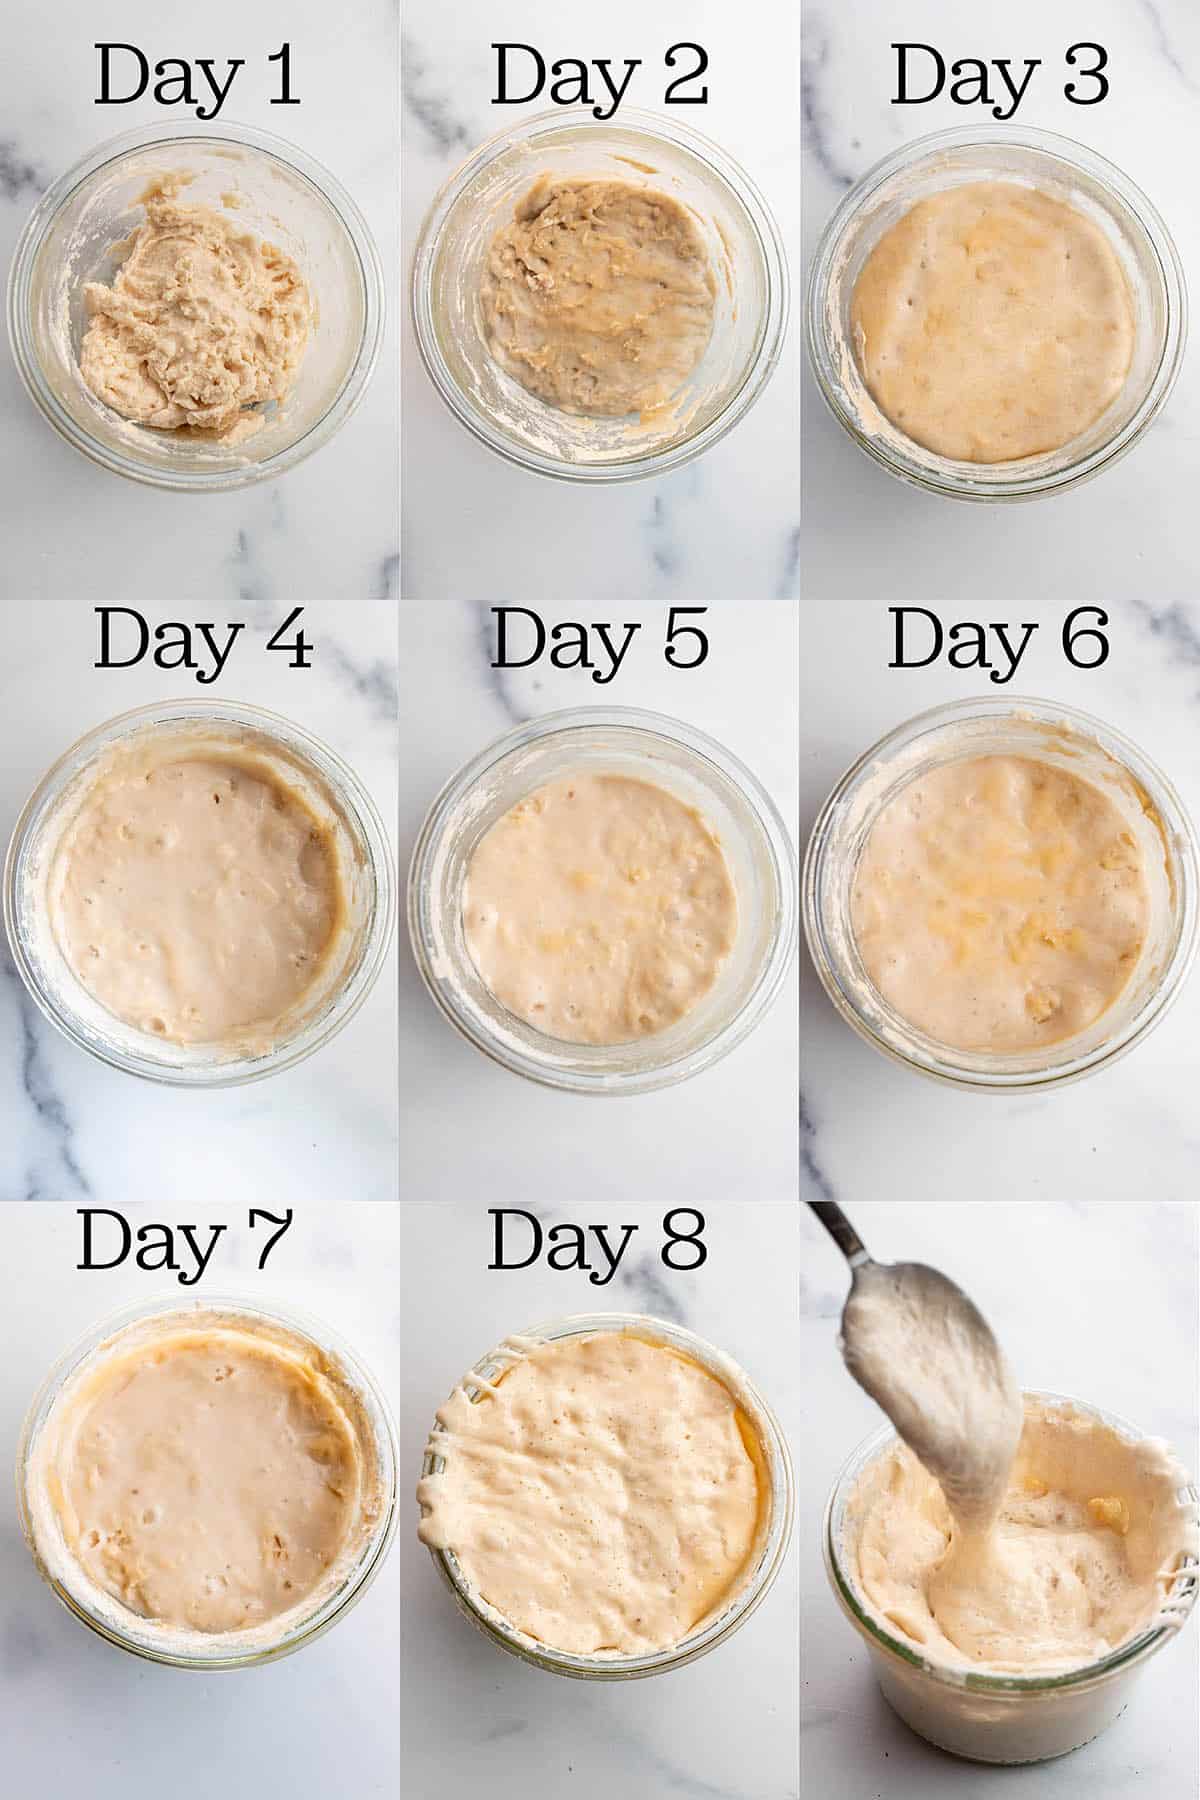 Day by day photos of making a sourdough starter.